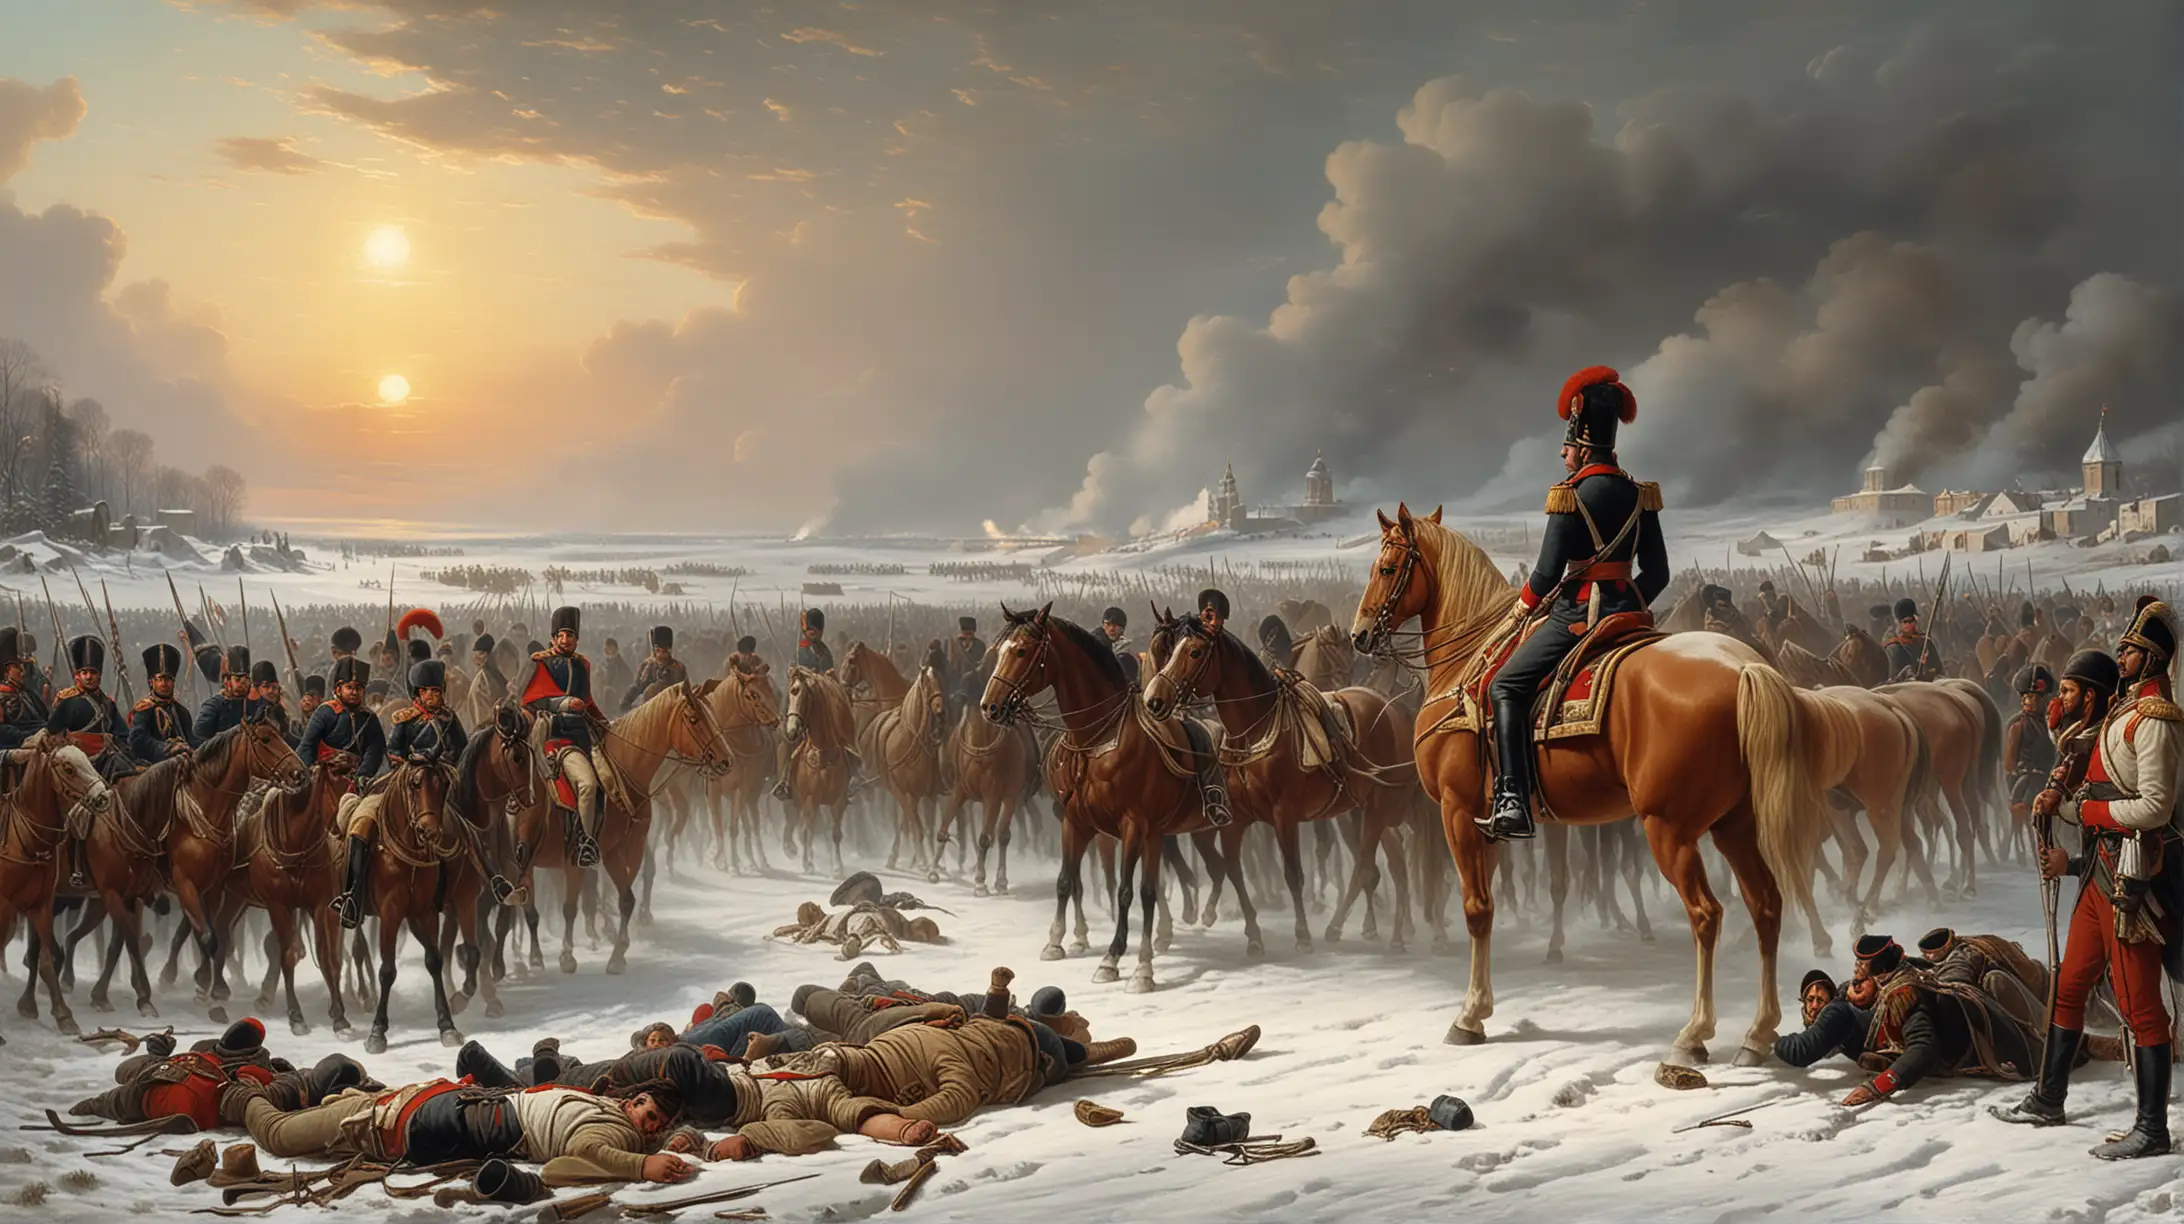 Historical Painting Napoleons Retreat from Moscow with Injured Fighters and Napoleon on Horseback